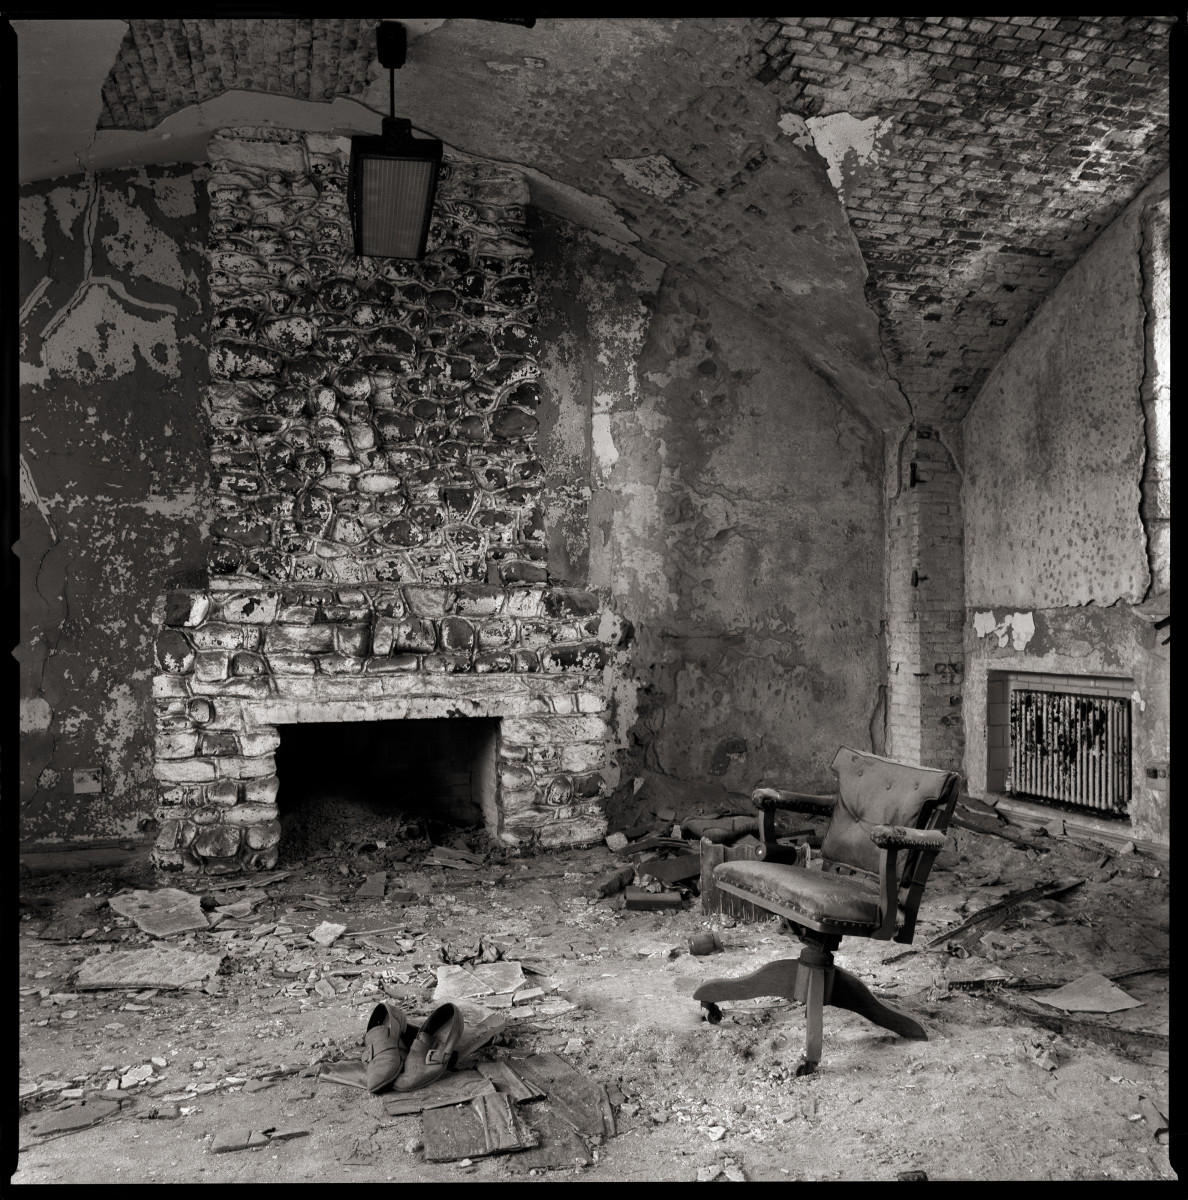 Warden's Office by Eric T. Kunsman  Image: ID: A black and white image shows a decrepit room with the back wall being an old brick fireplace and chimney.  There is a chair to the right of the fireplace.  There is debris on the ground around the chair and by the fireplace.  There is a hanging light fixture.